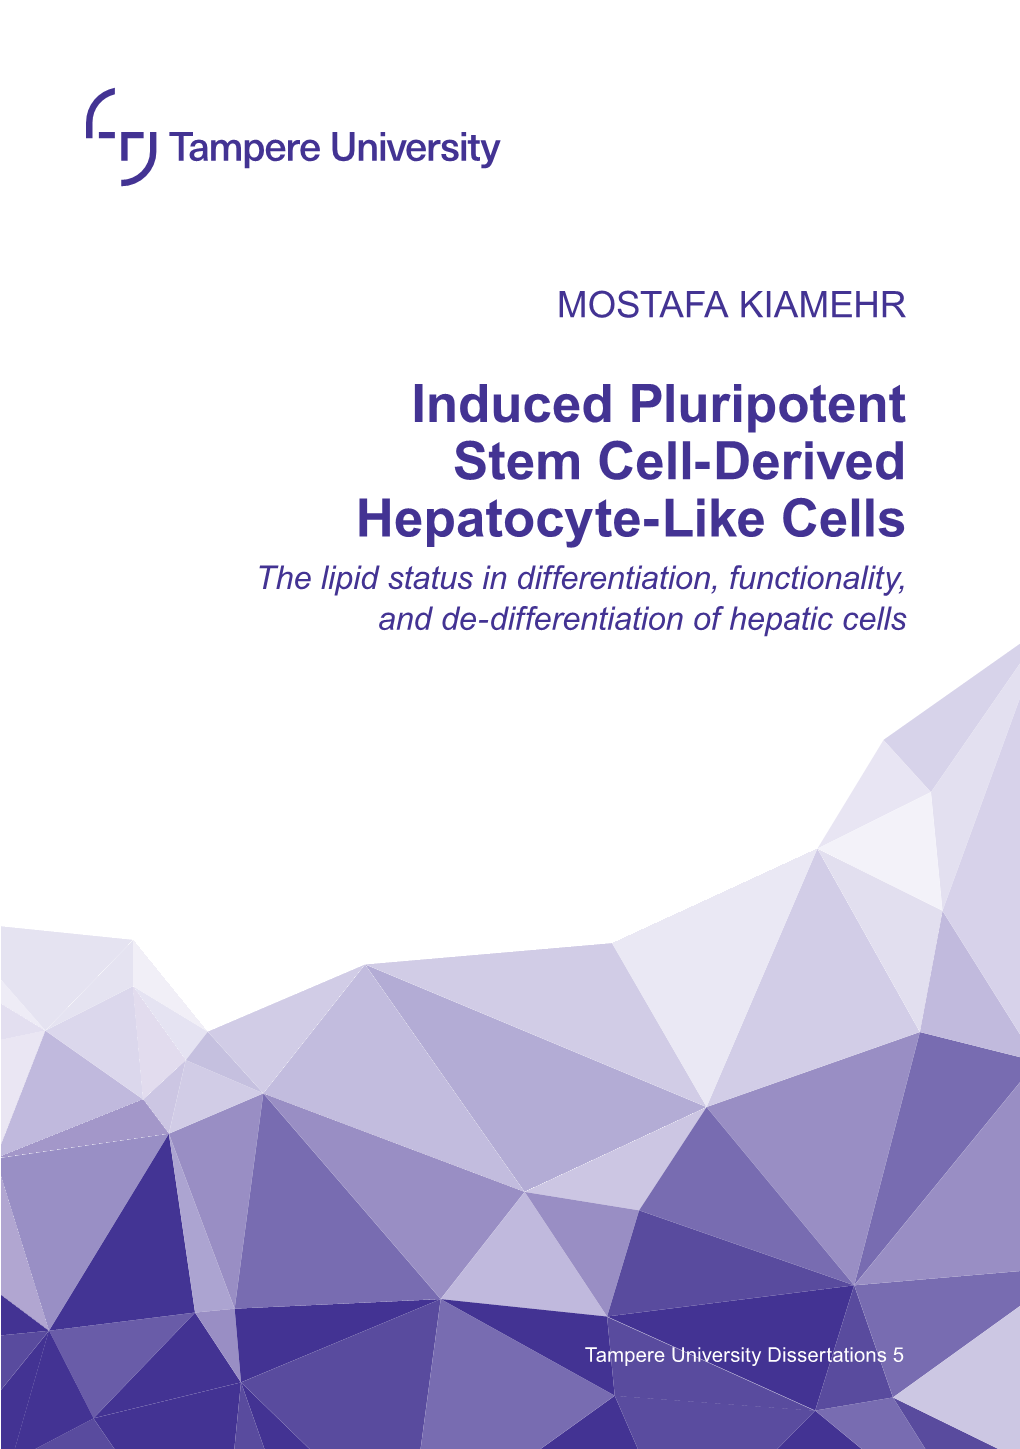 Induced Pluripotent Stem Cell-Derived Hepatocyte-Like Cells the Lipid Status in Differentiation, Functionality, and De-Differentiation of Hepatic Cells